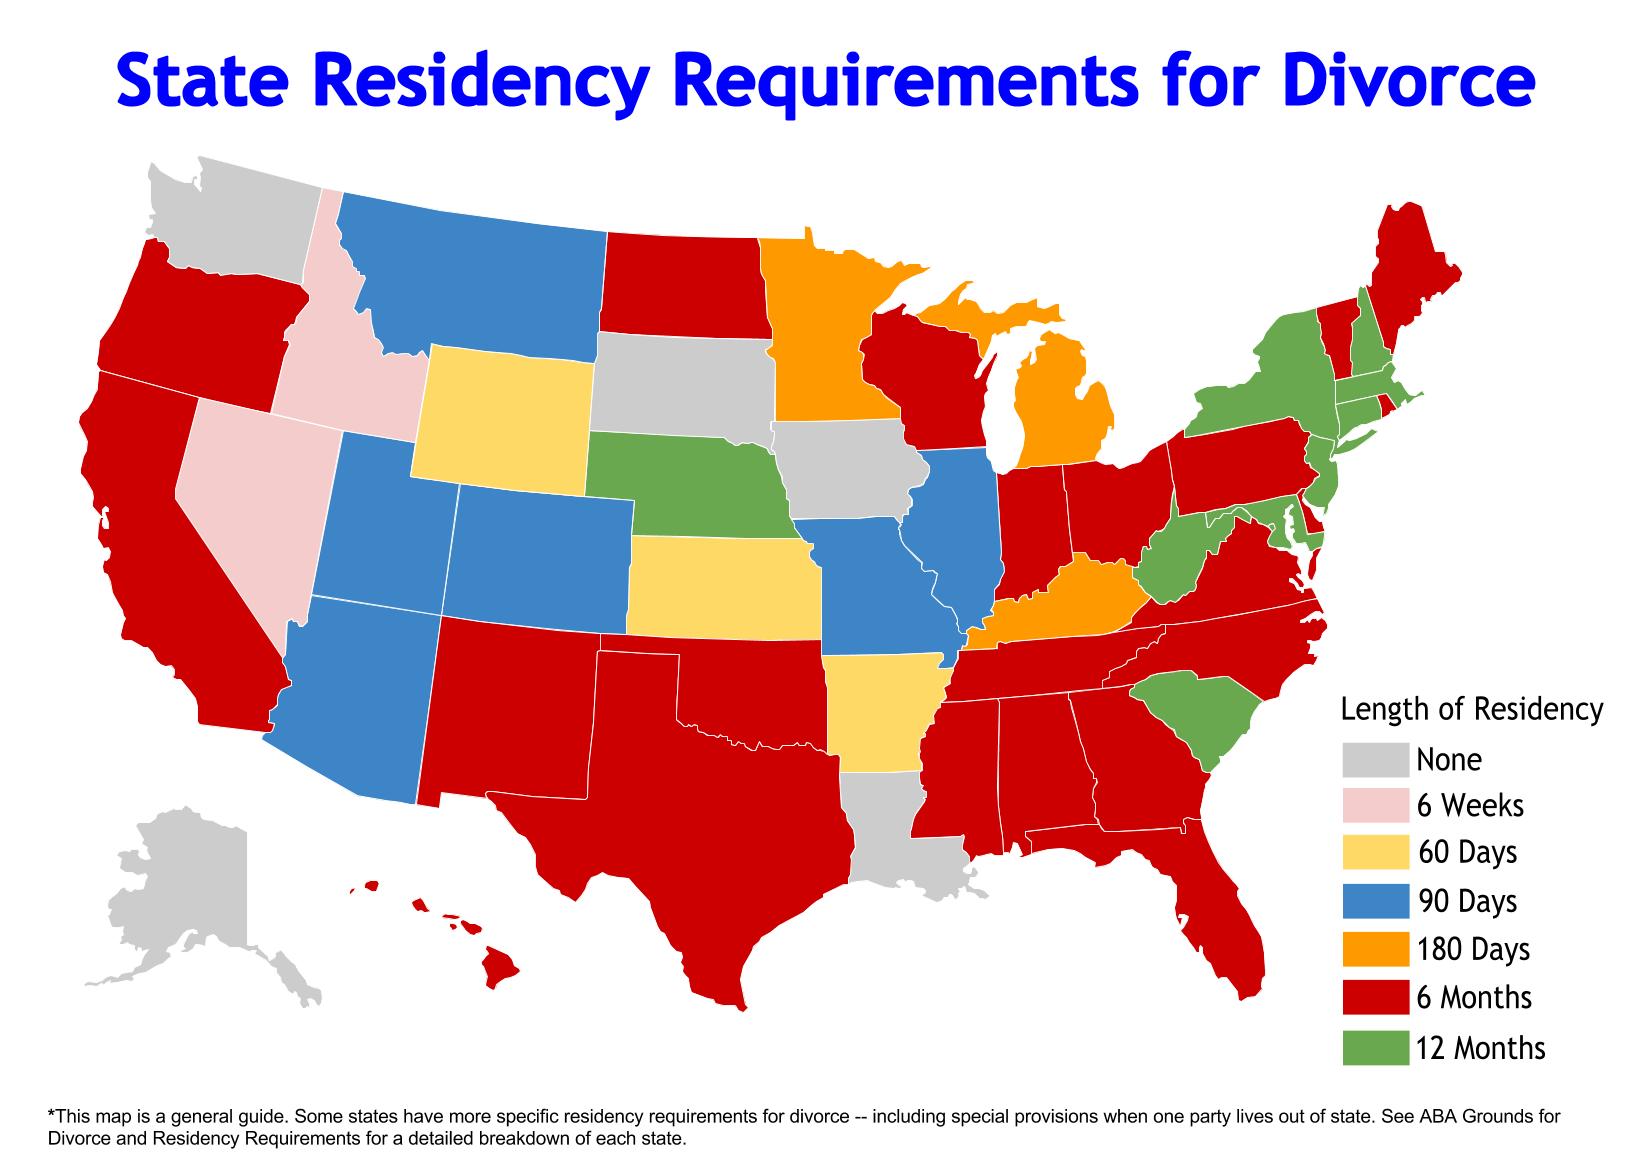 What determines state residency?